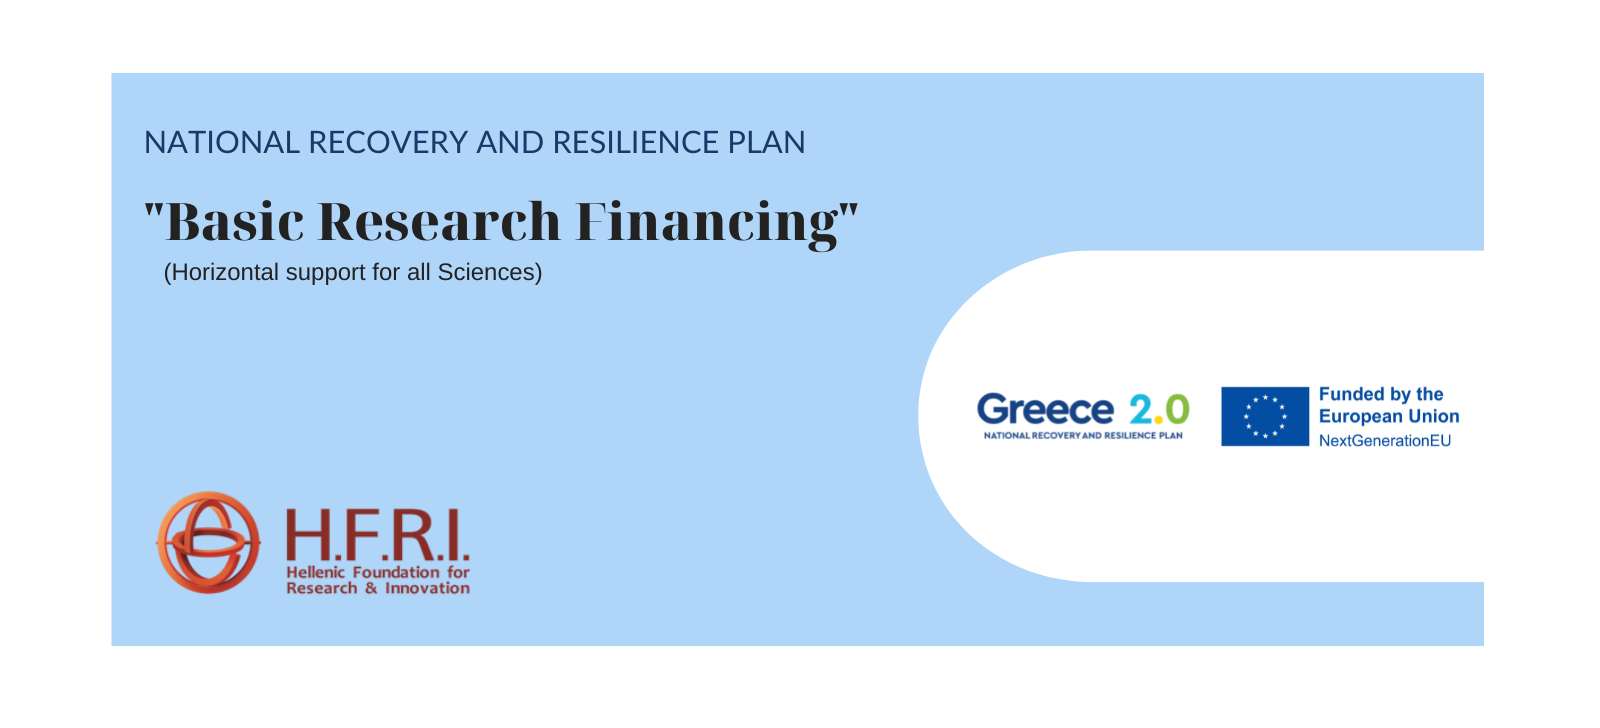 Basic Research Financing (Horizontal support for all Sciences), National Recovery and Resilience Plan (Greece 2.0)